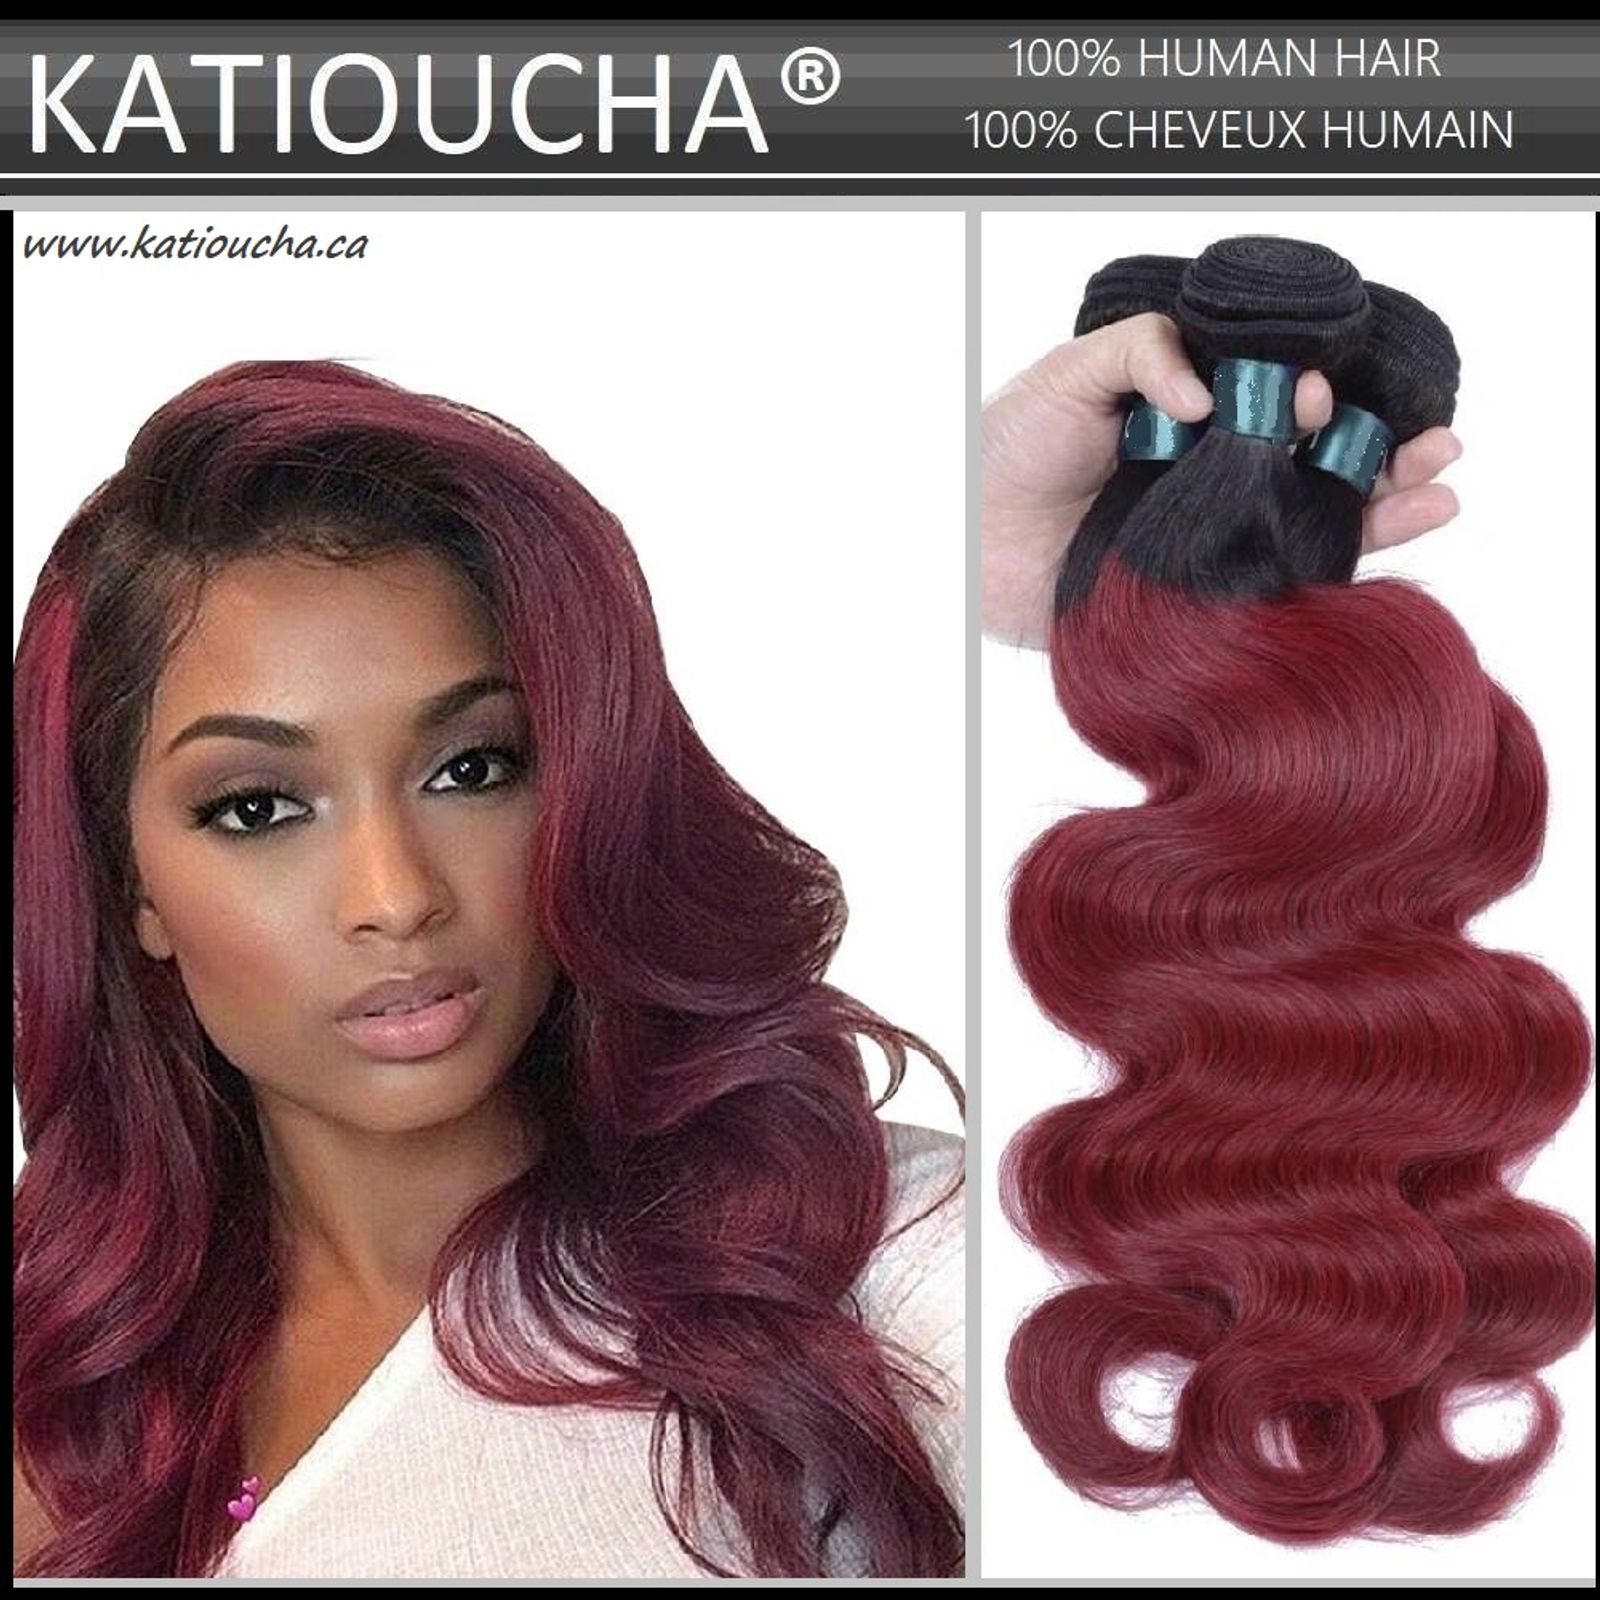 100 Remy Human Hair Extensions 8a Weft Weave Bundle Black Roots Wine Red Ombre Body Wave 100g